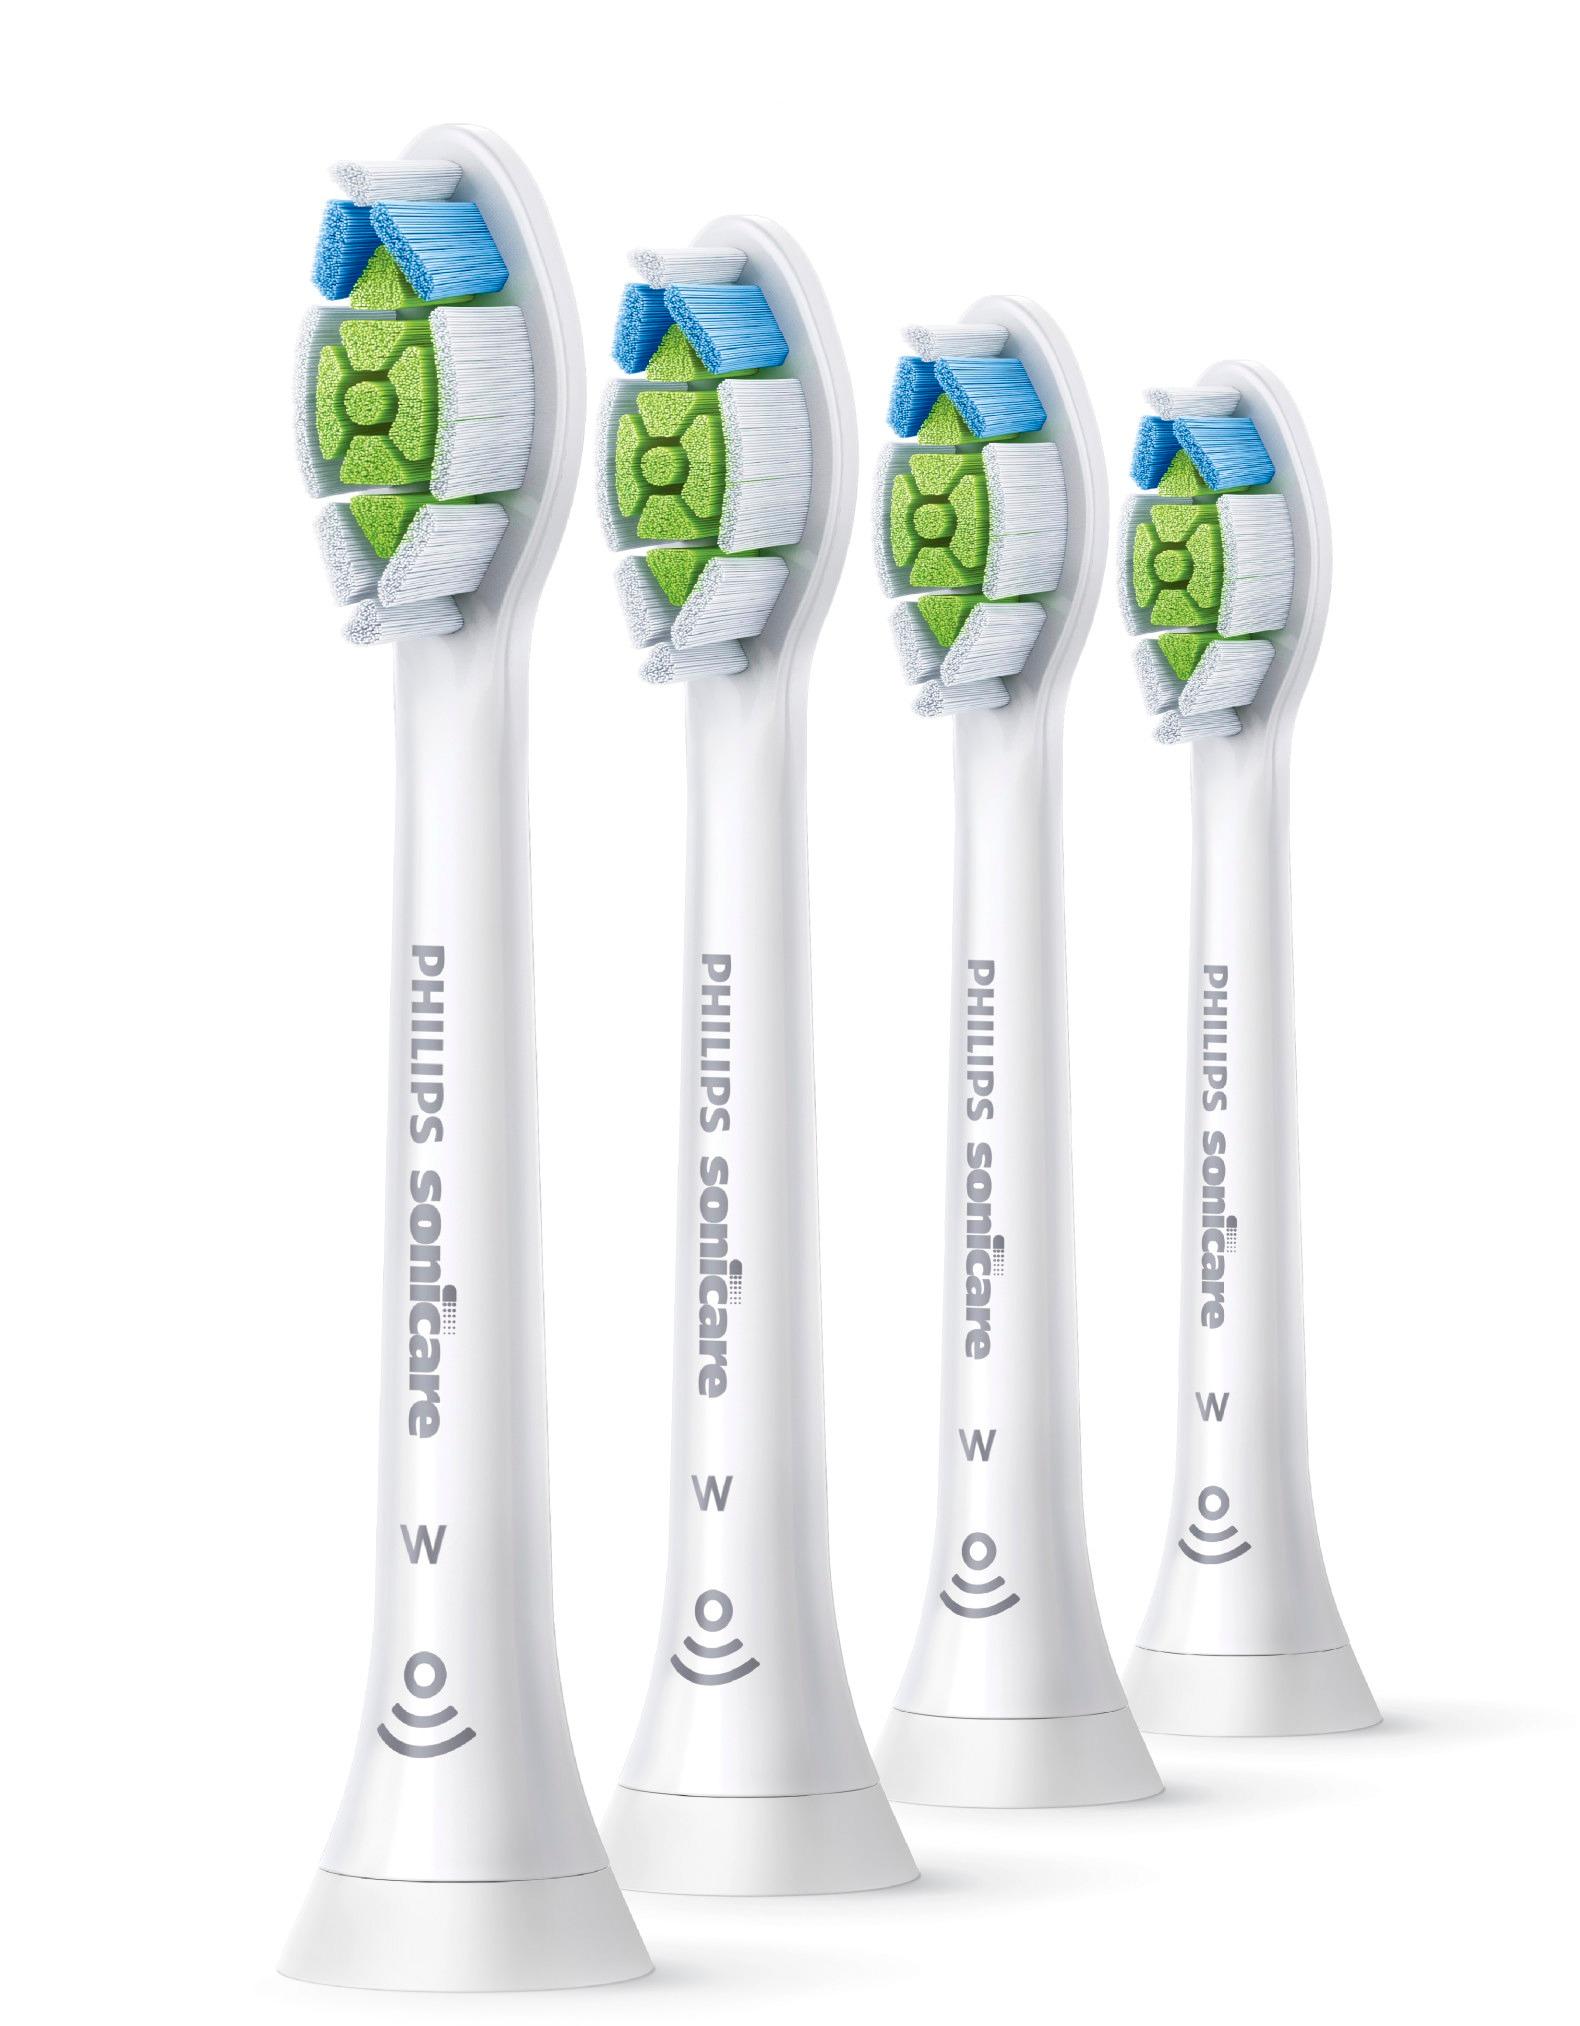 Praten Defilé Gladys Philips Sonicare DiamondClean Replacement Toothbrush Heads (4-pack) White  HX6064/65 - Best Buy